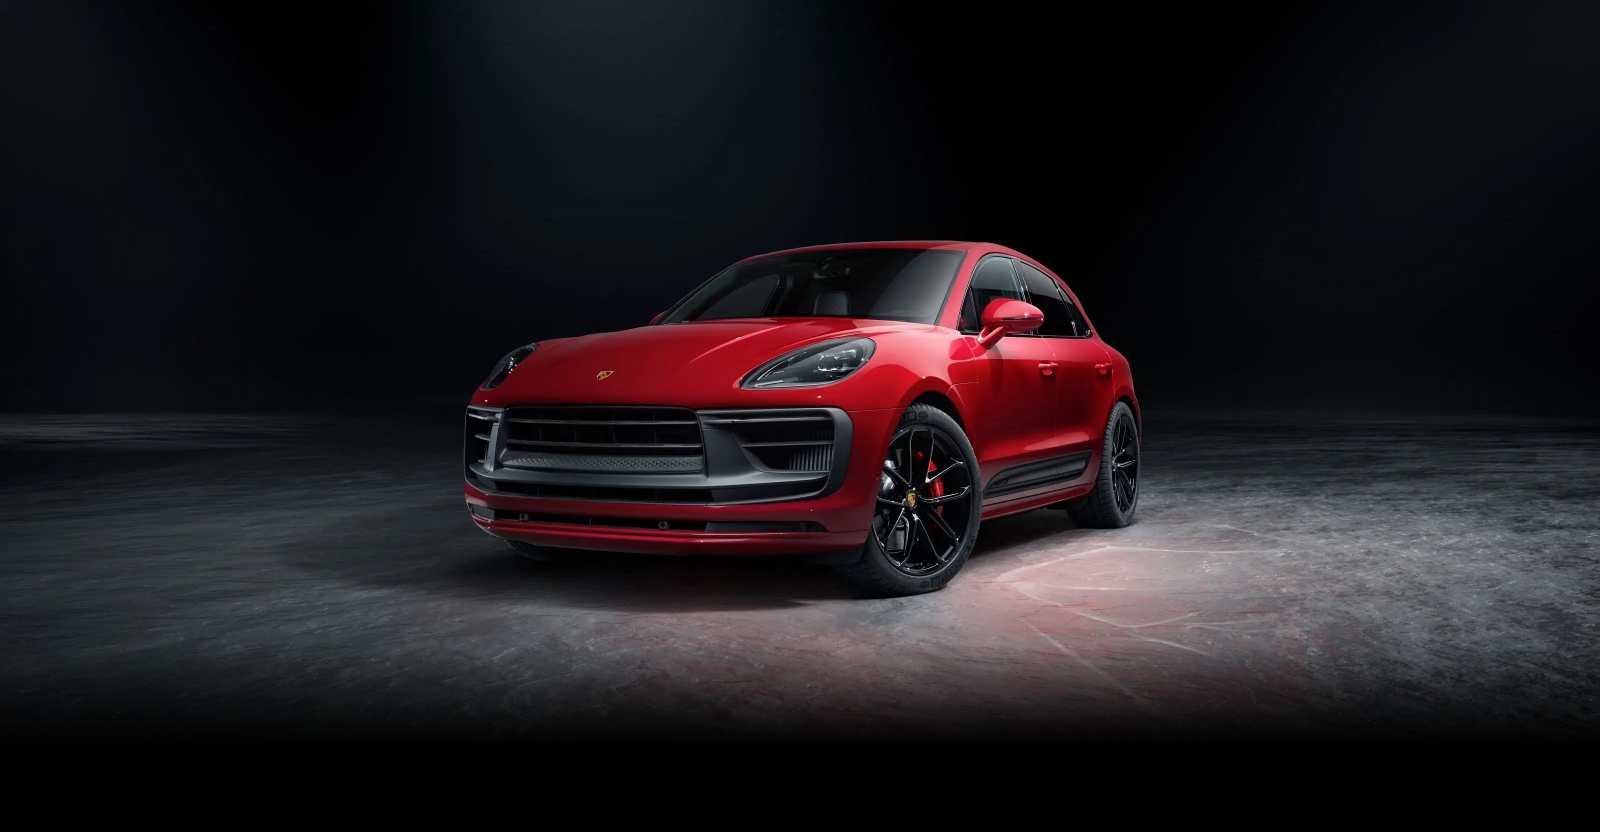 Experience driving a brand-new electric Porsche SUV from the luxury dealer, Porsche Fort Myers.